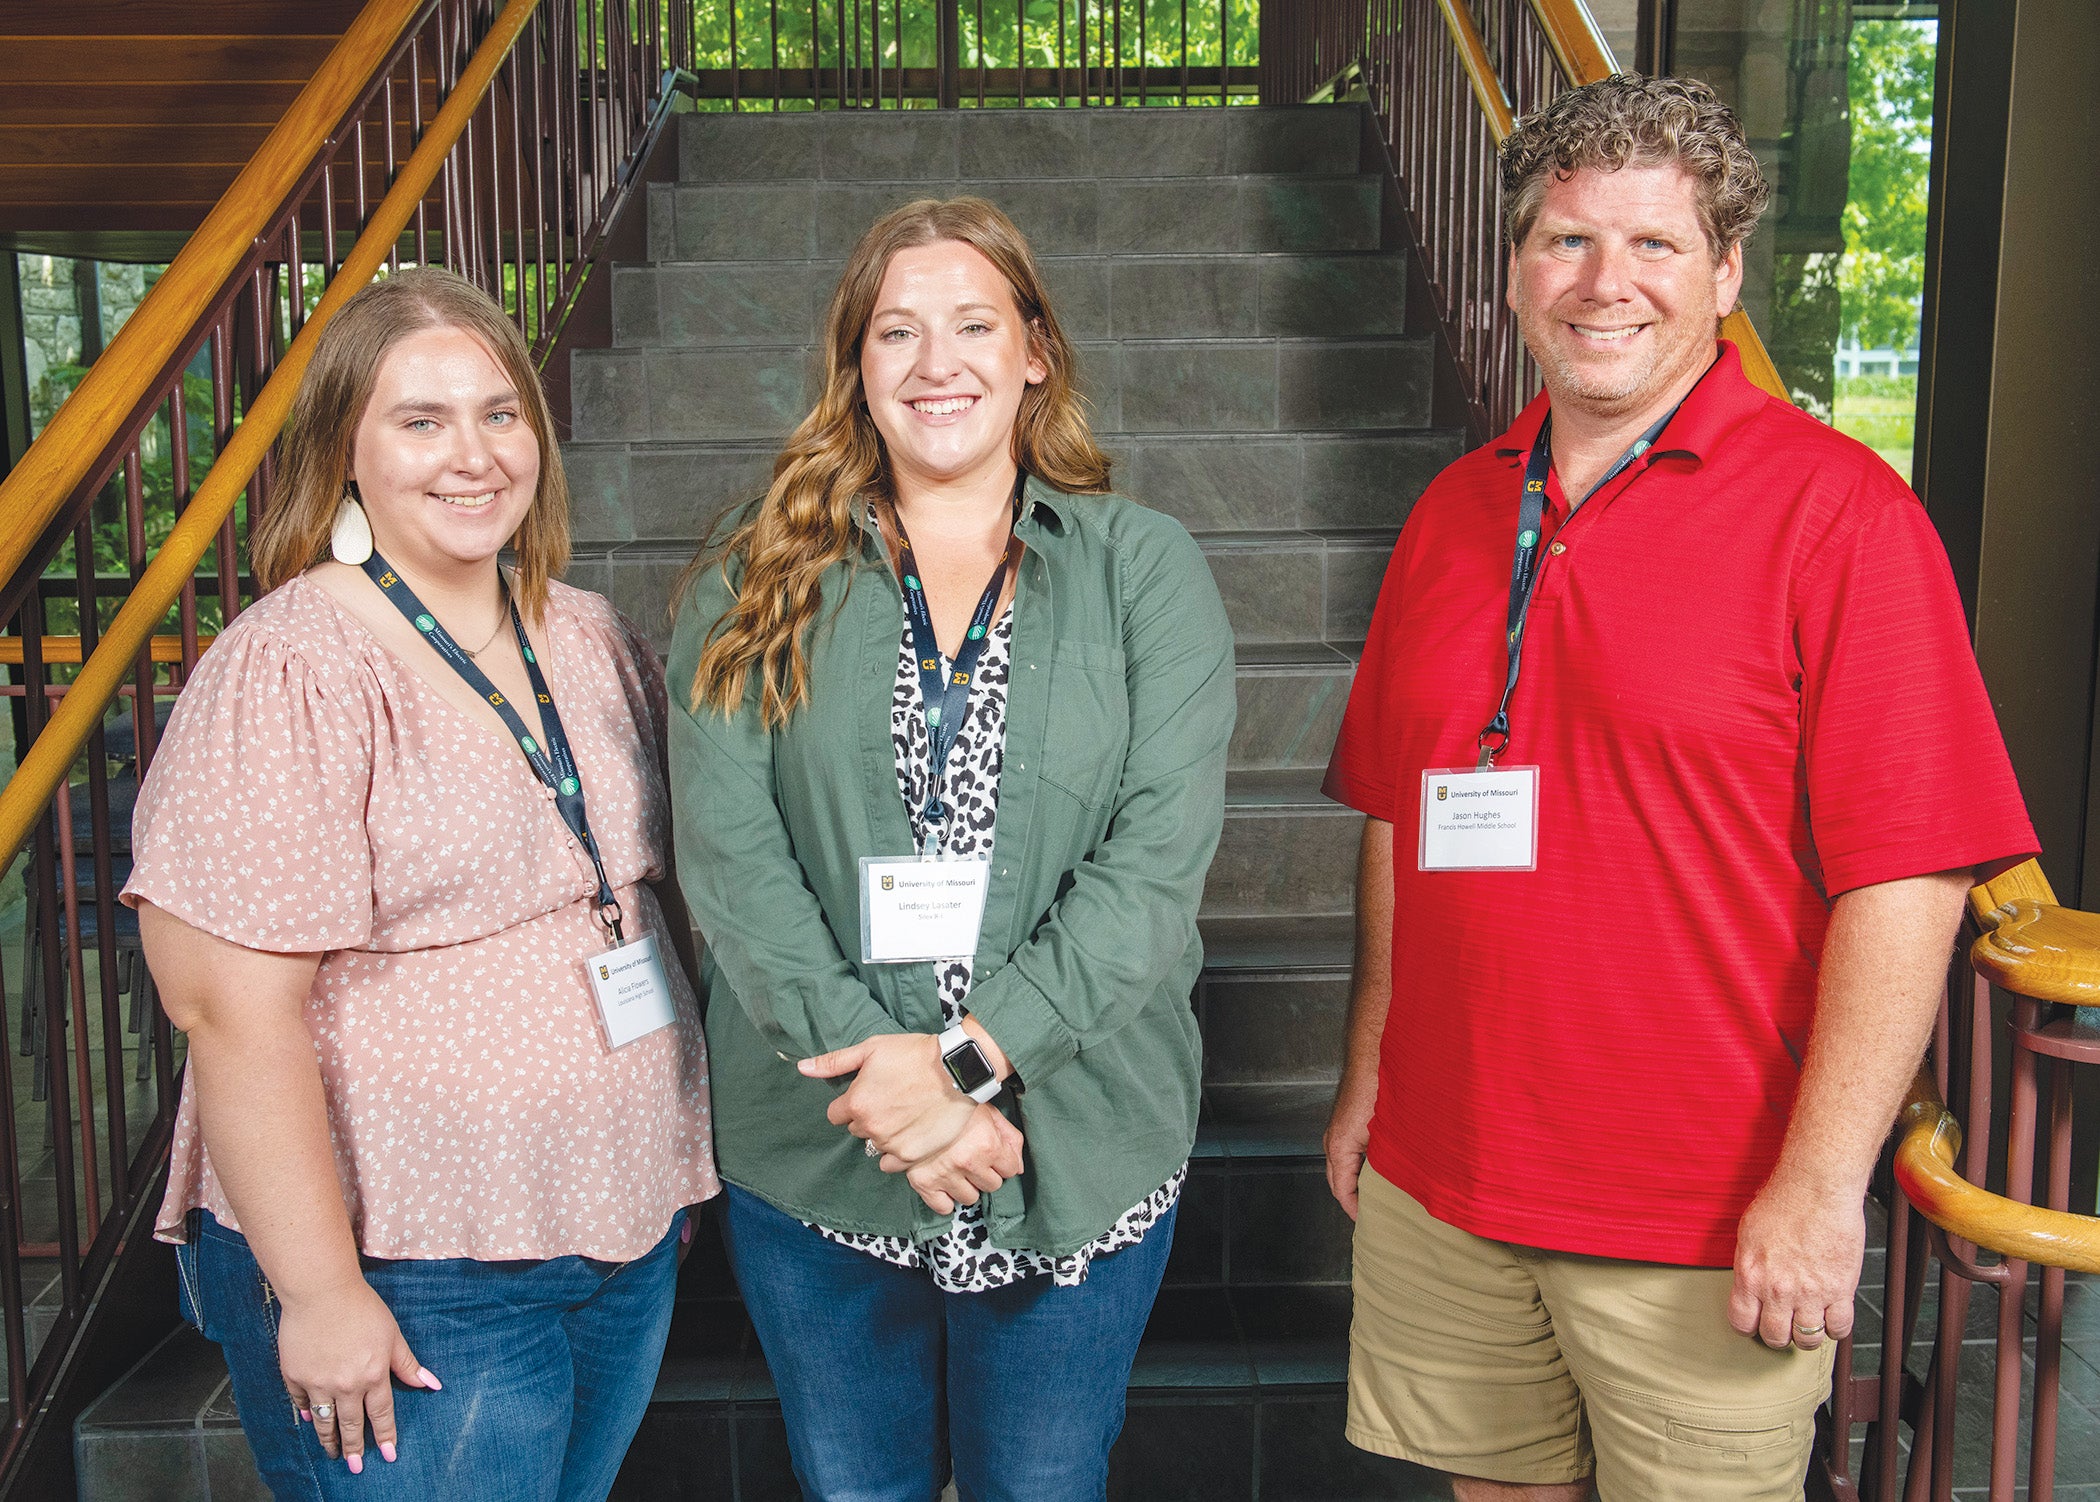 CREC-sponsored teachers, from left, Alicia Flowers (Louisiana), Lindsey Lasater (Silex) and Jason Hughes (Francis Howell Middle School)